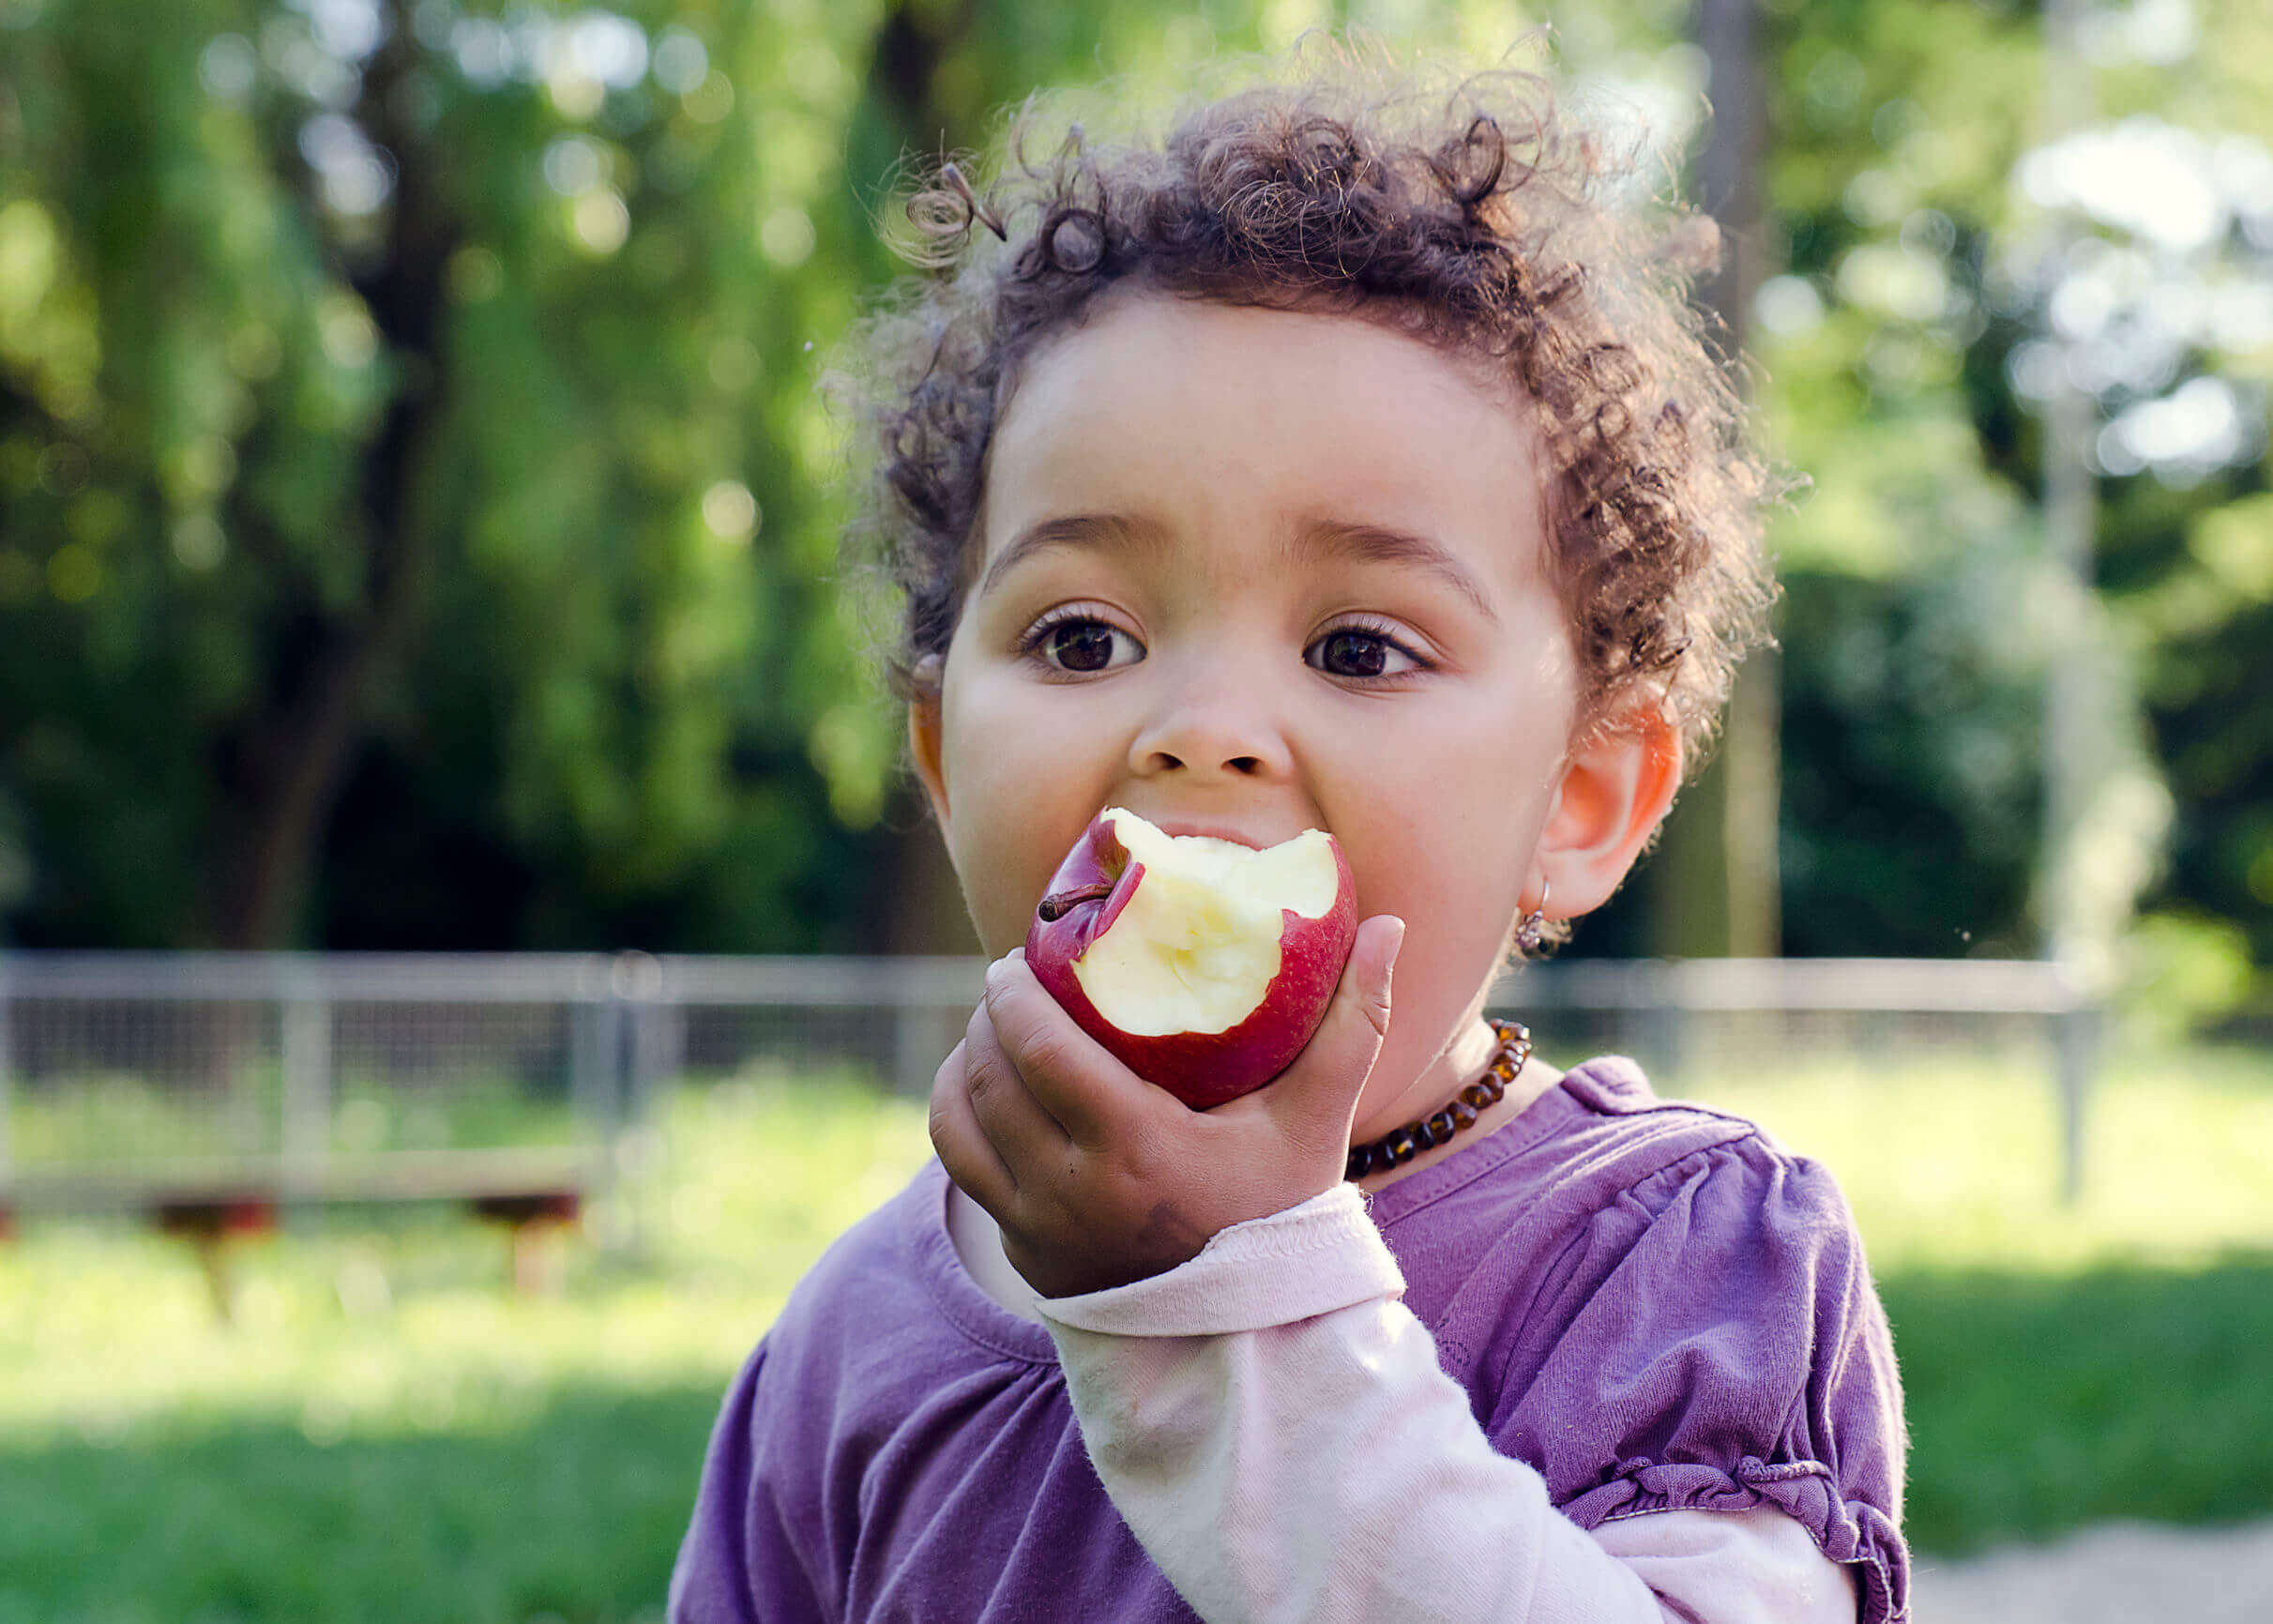 A toddler eating an apple.